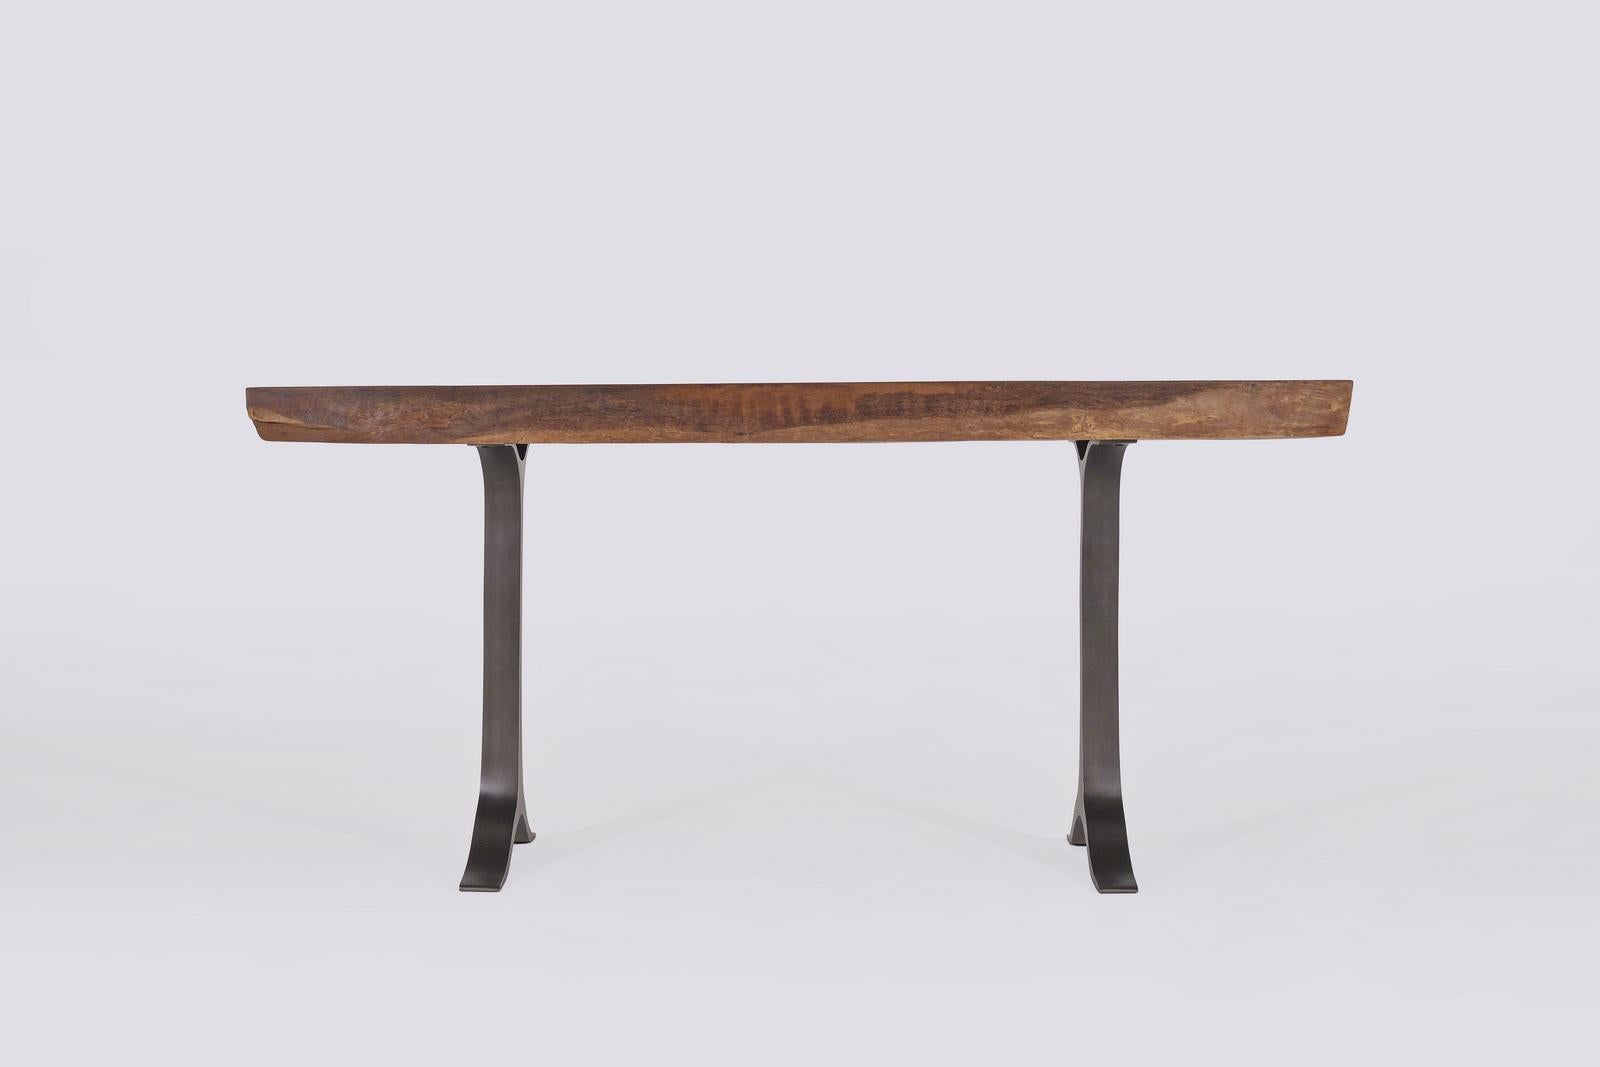 Model: ATOP-PT26-AL4-CW-RW
Top: Single slab of antique hardwood
Top finish: Raw
Base: Aluminium 
Base finish: Brushed charcoal
Dimensions: 199 x 69 x 94 cm
(W x D x H) 78.35 x 21.17 x 37 inch
P. Tendercool ATOPs – tables made with antique